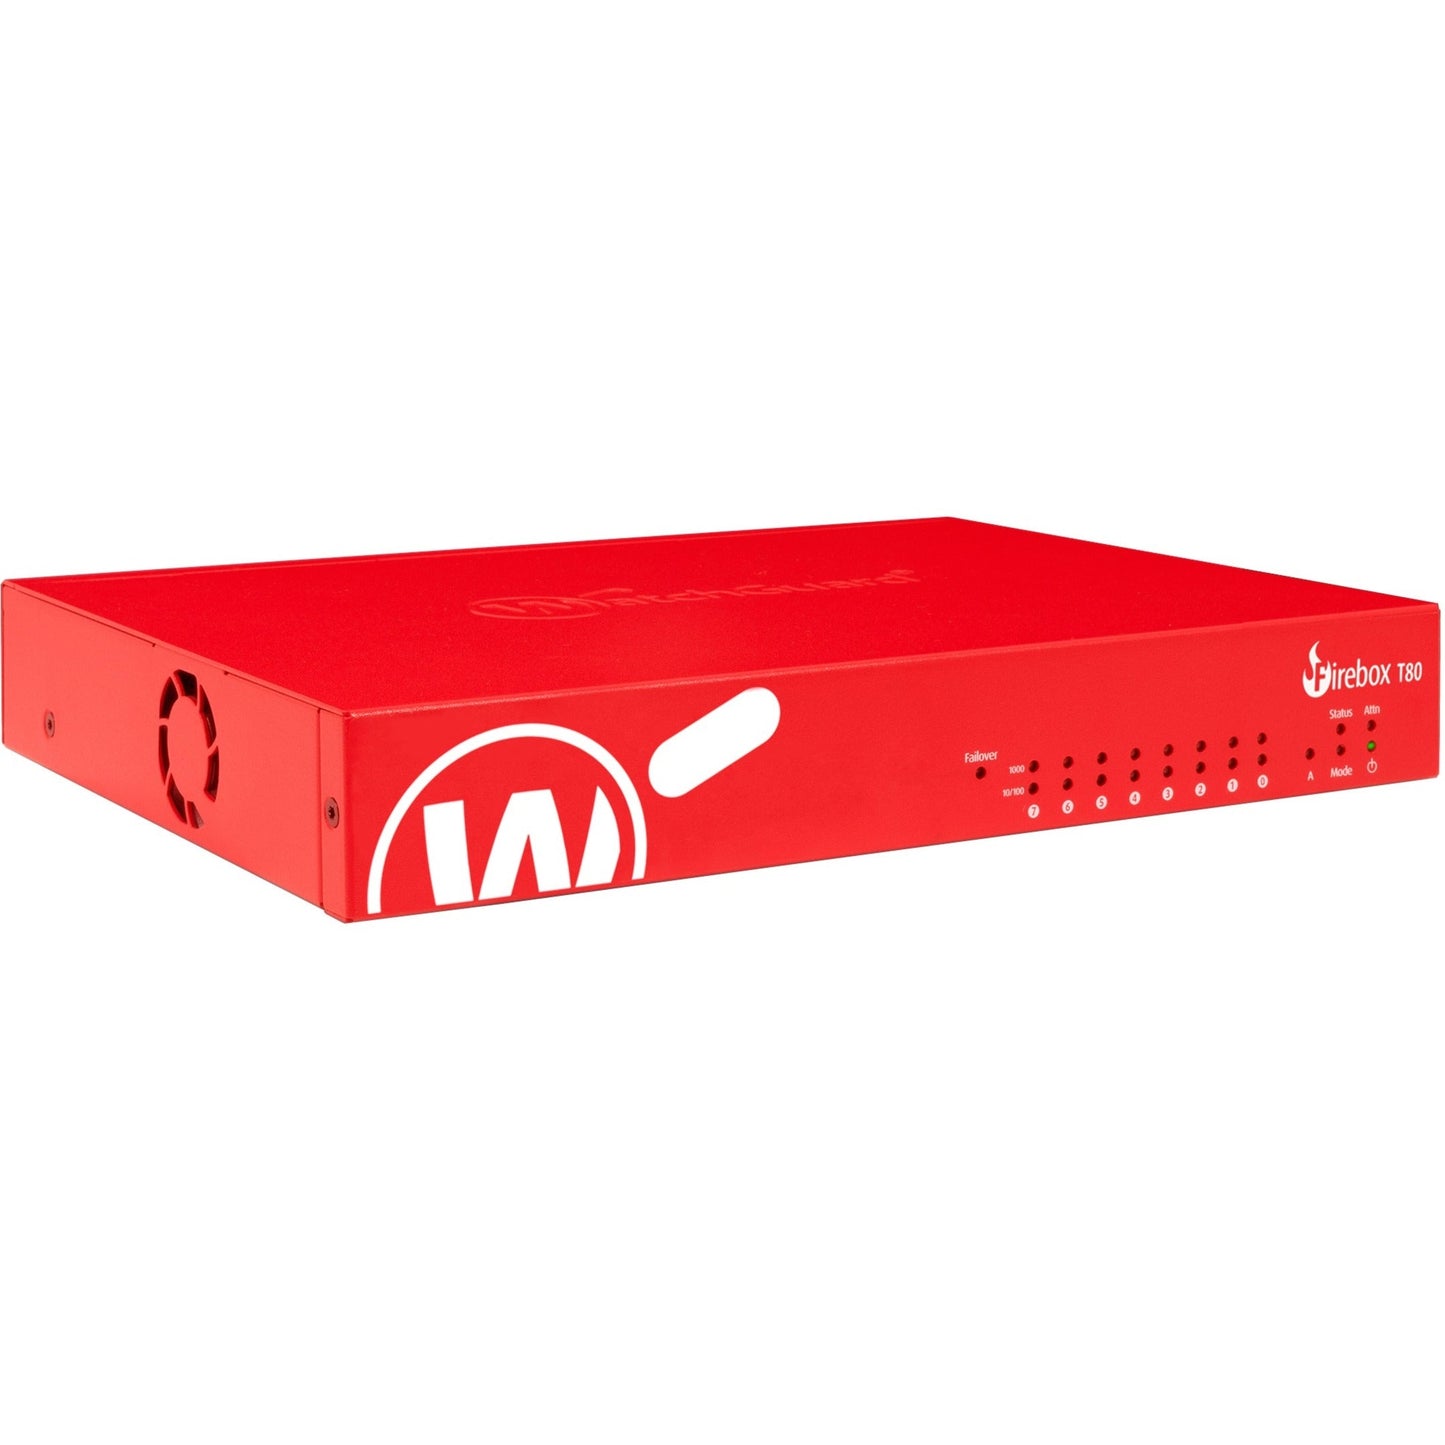 WatchGuard Firebox T80 with 1-yr Total Security Suite (US)